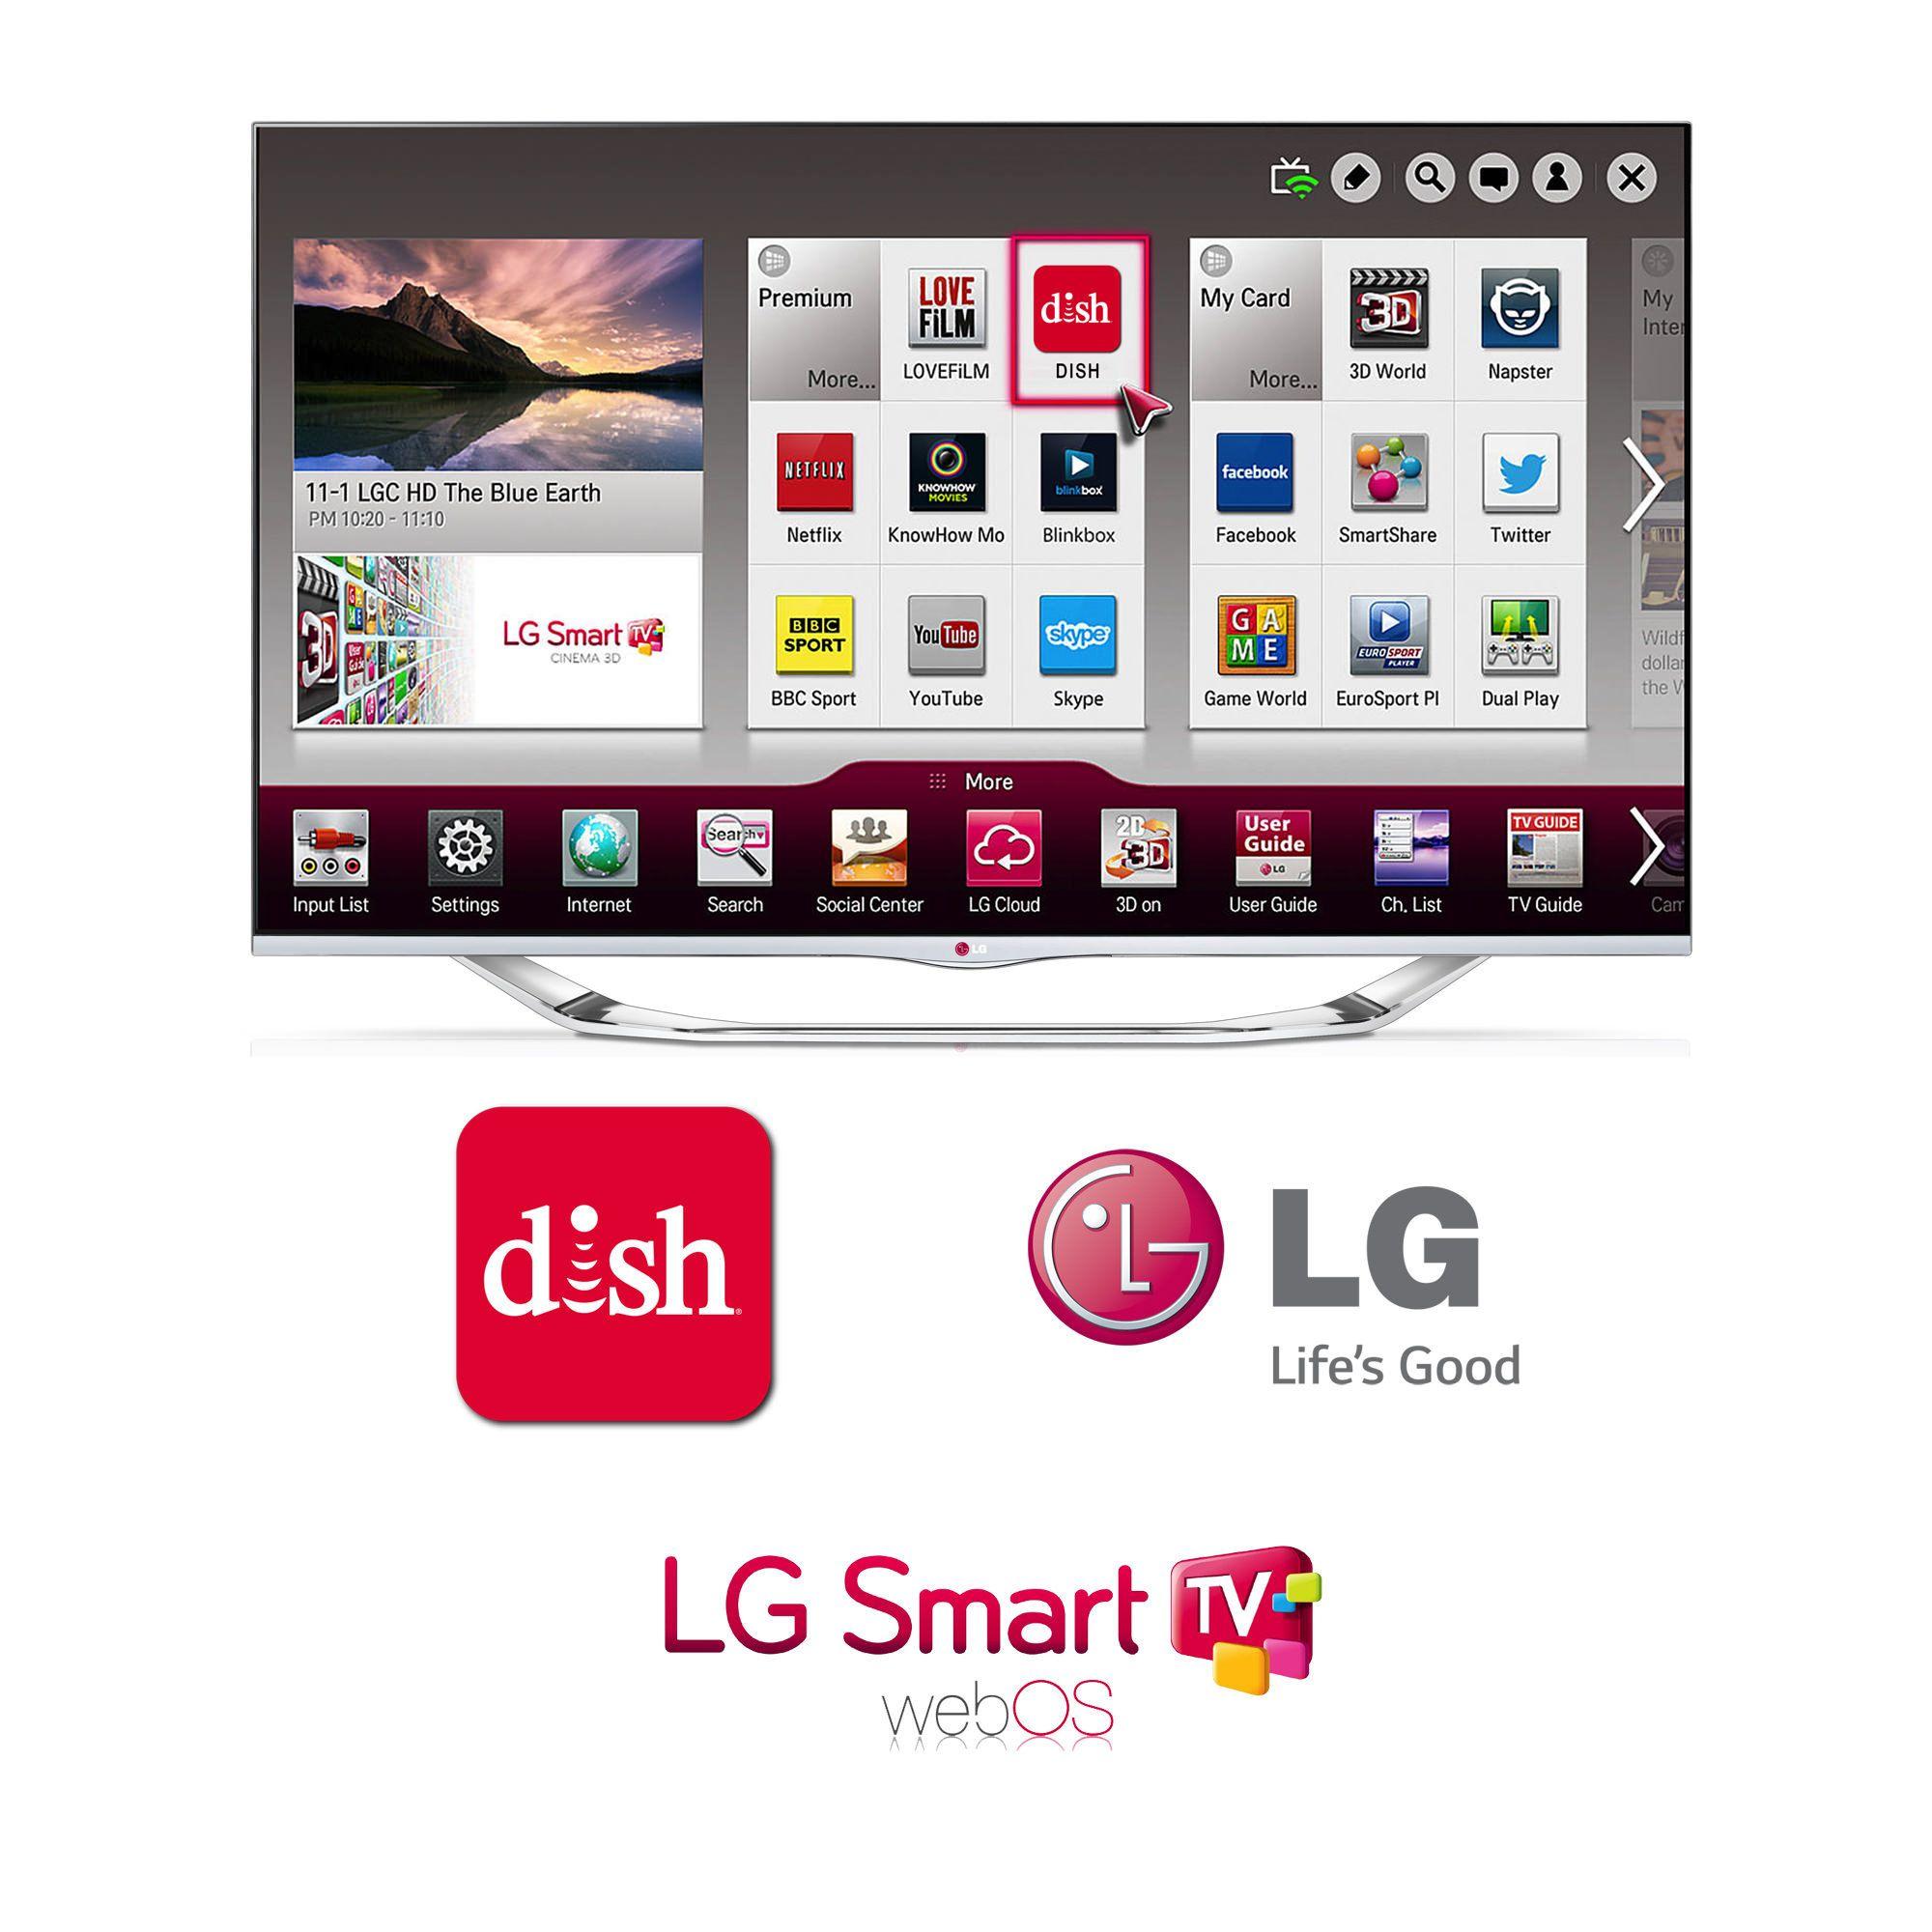 Small LG TV Logo - DISH App Delivers Hopper Experience on LG Smart TVs | Business Wire